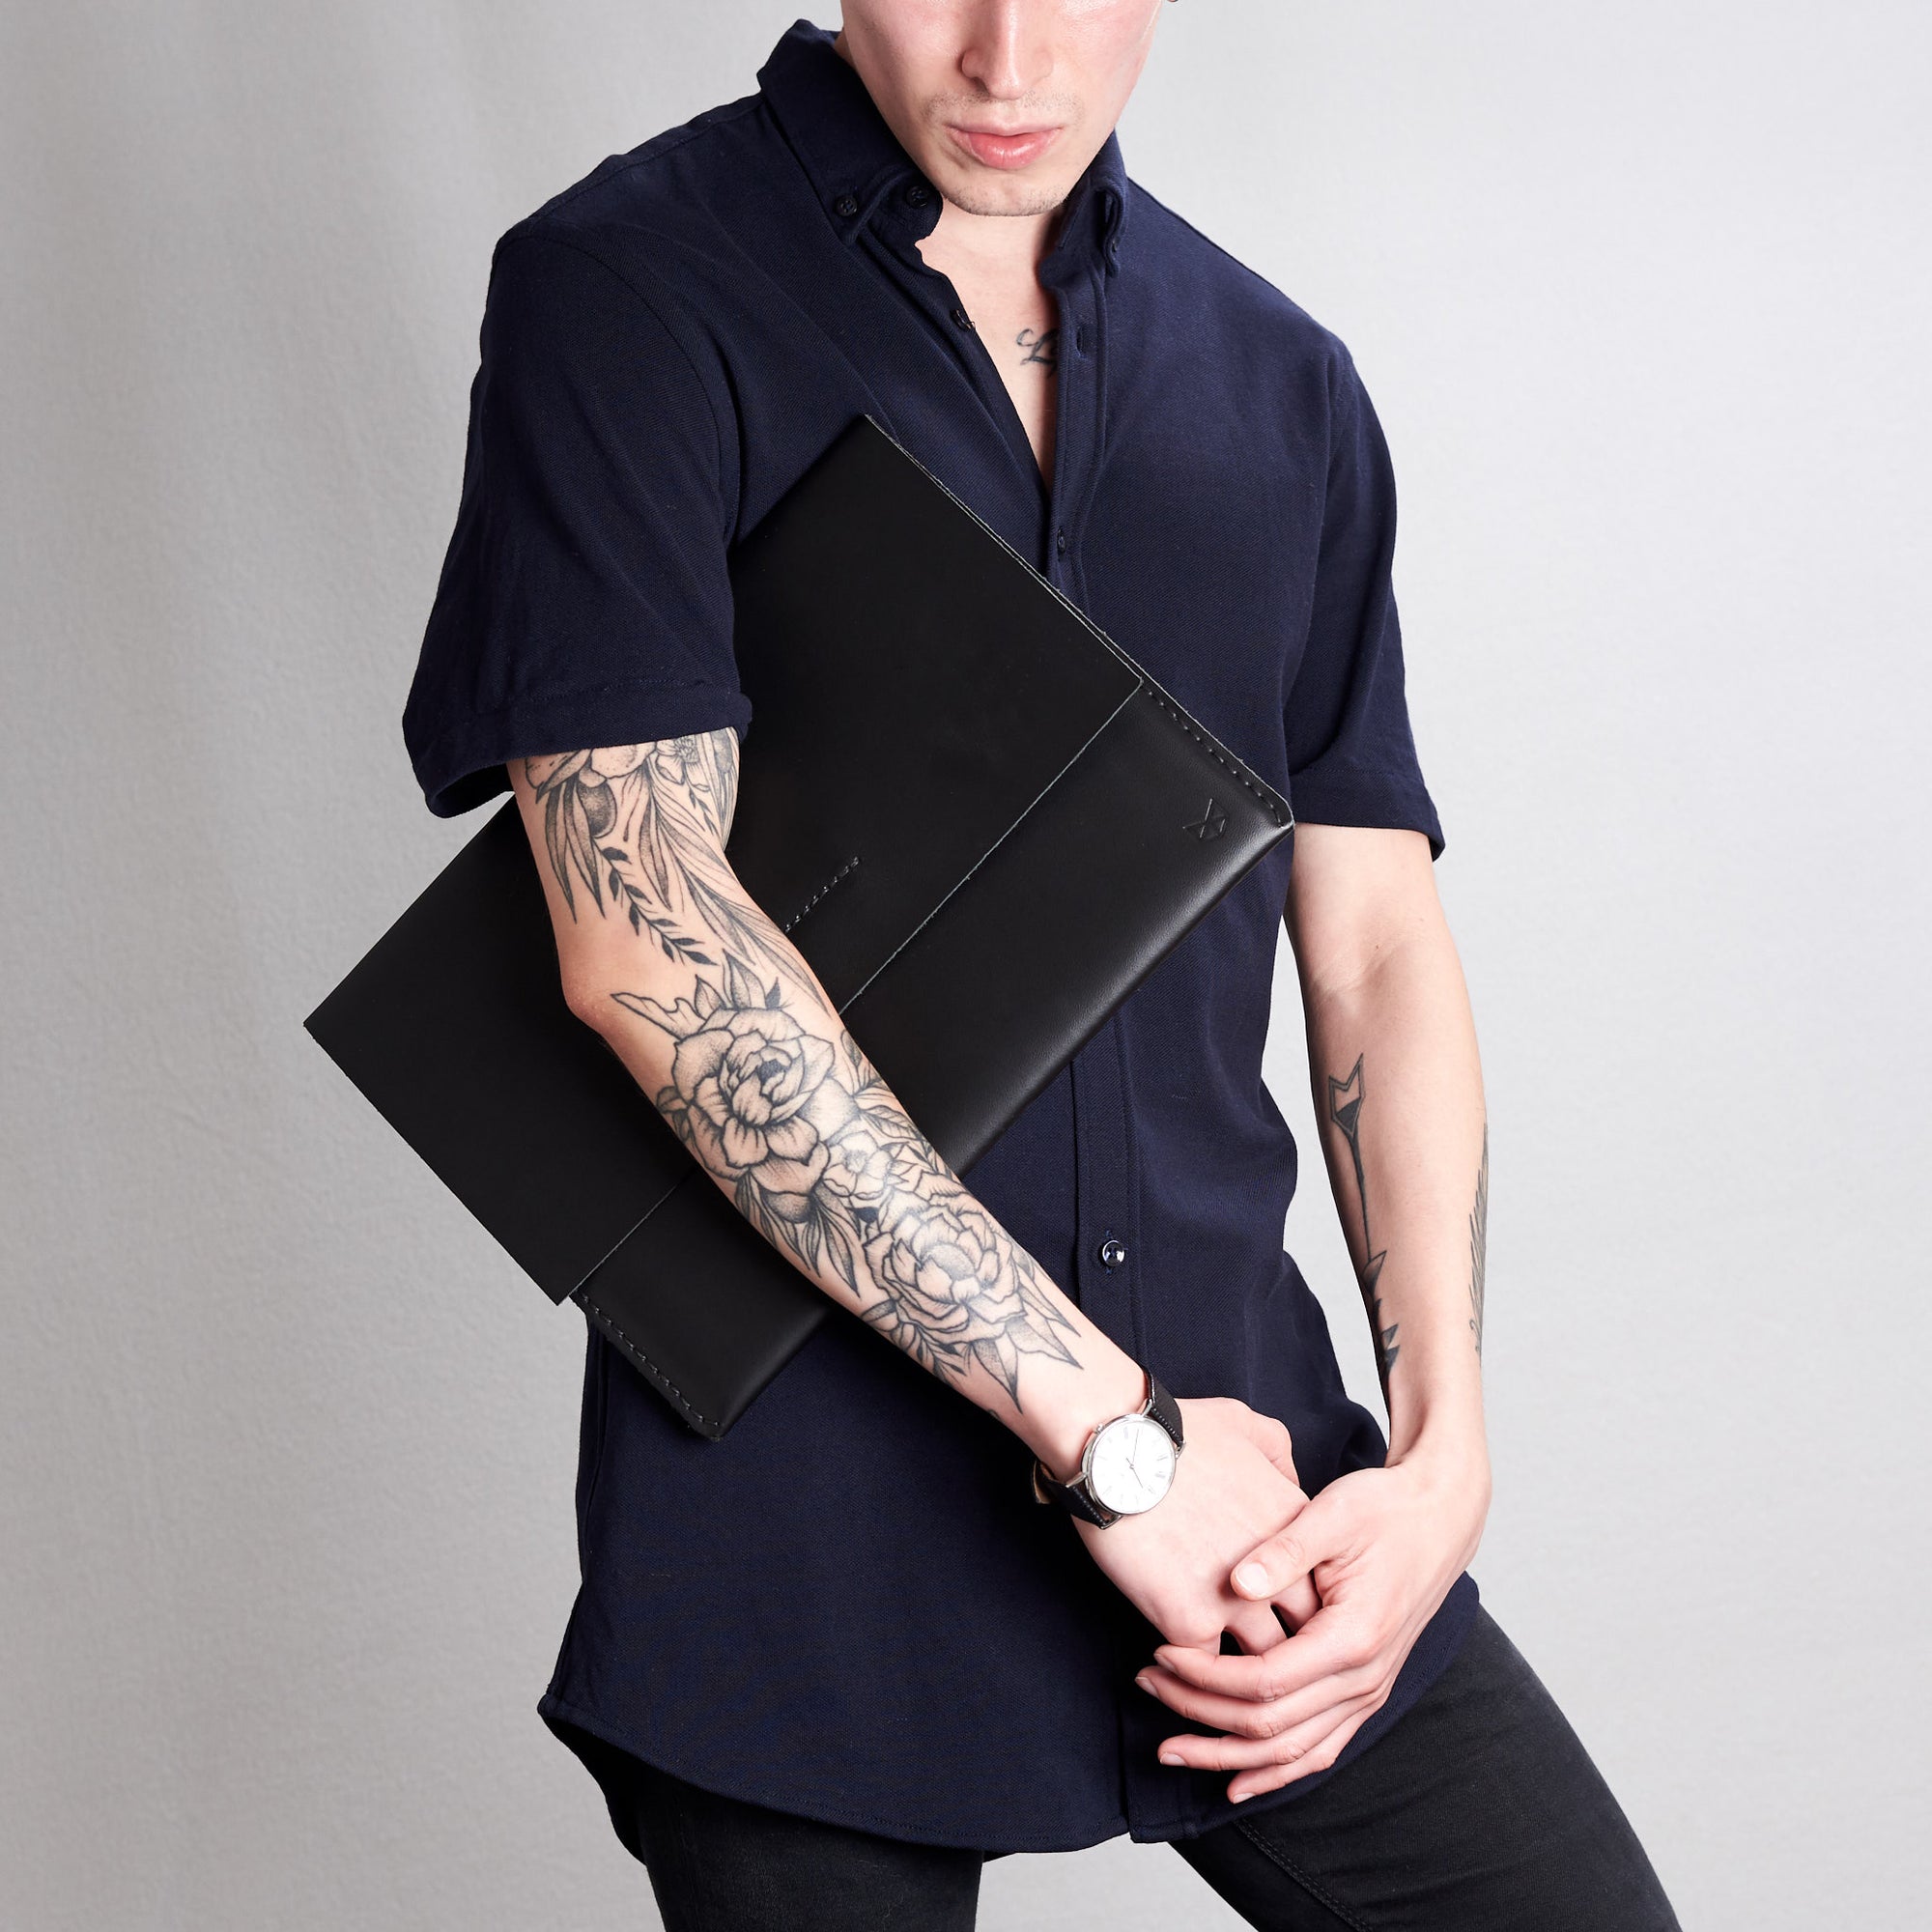 Style holding case by model. Black draftsman 1 case by Capra Leather. Microsoft Surface sleeve.